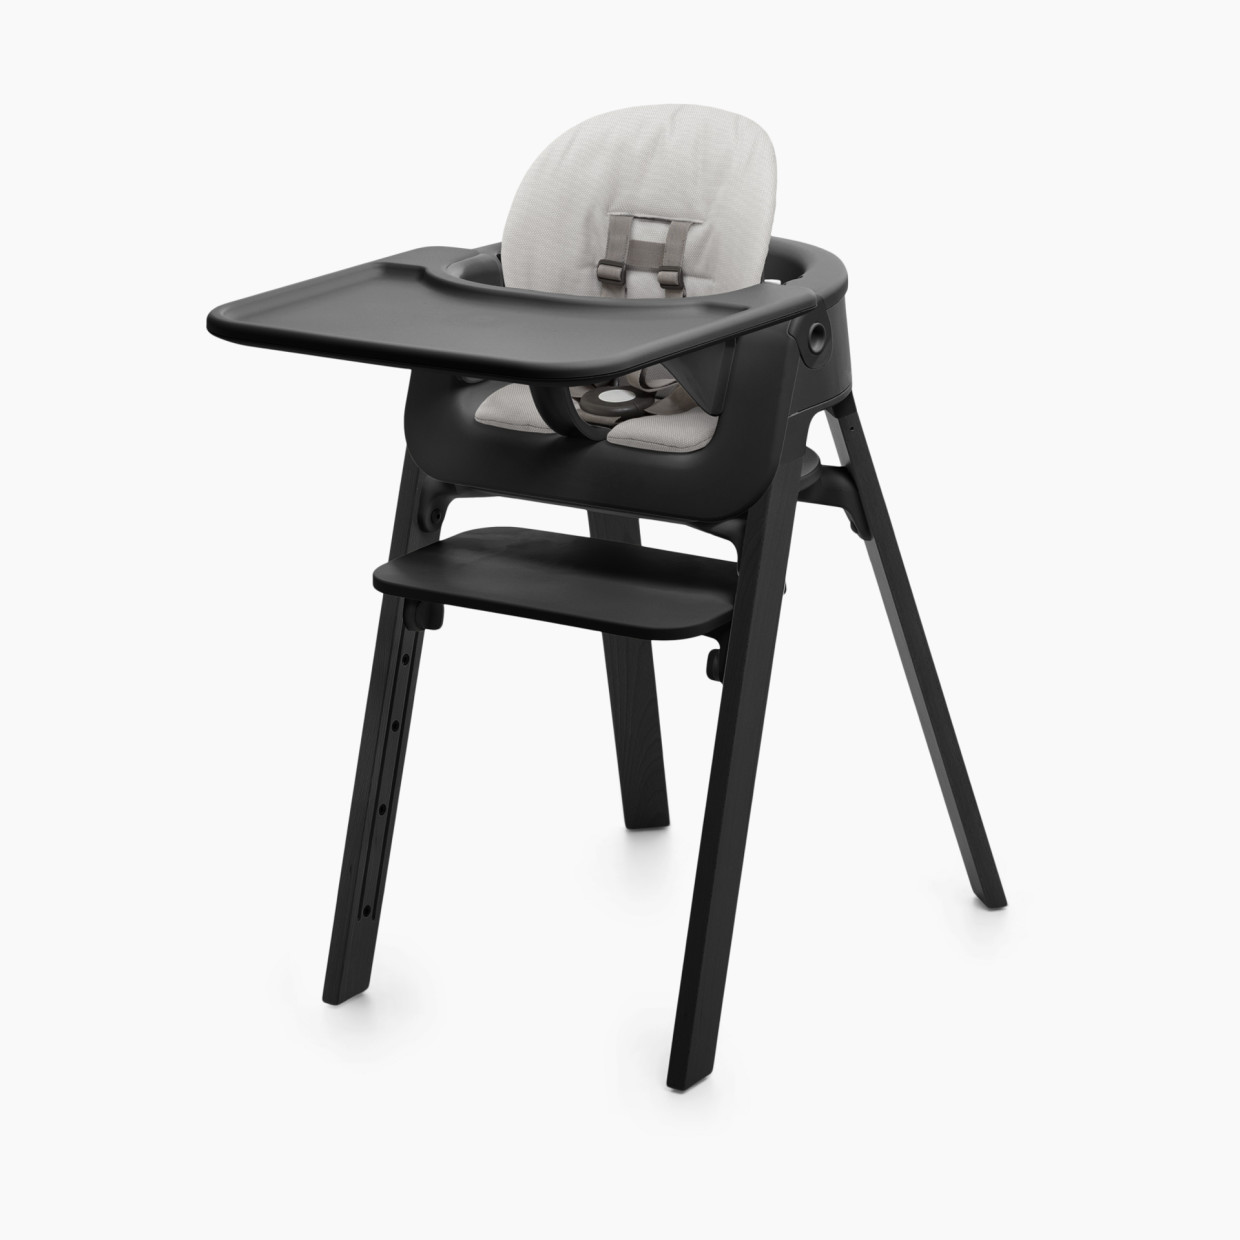 Stokke Steps Complete High Chair - Black Seat/Grey Cushion.